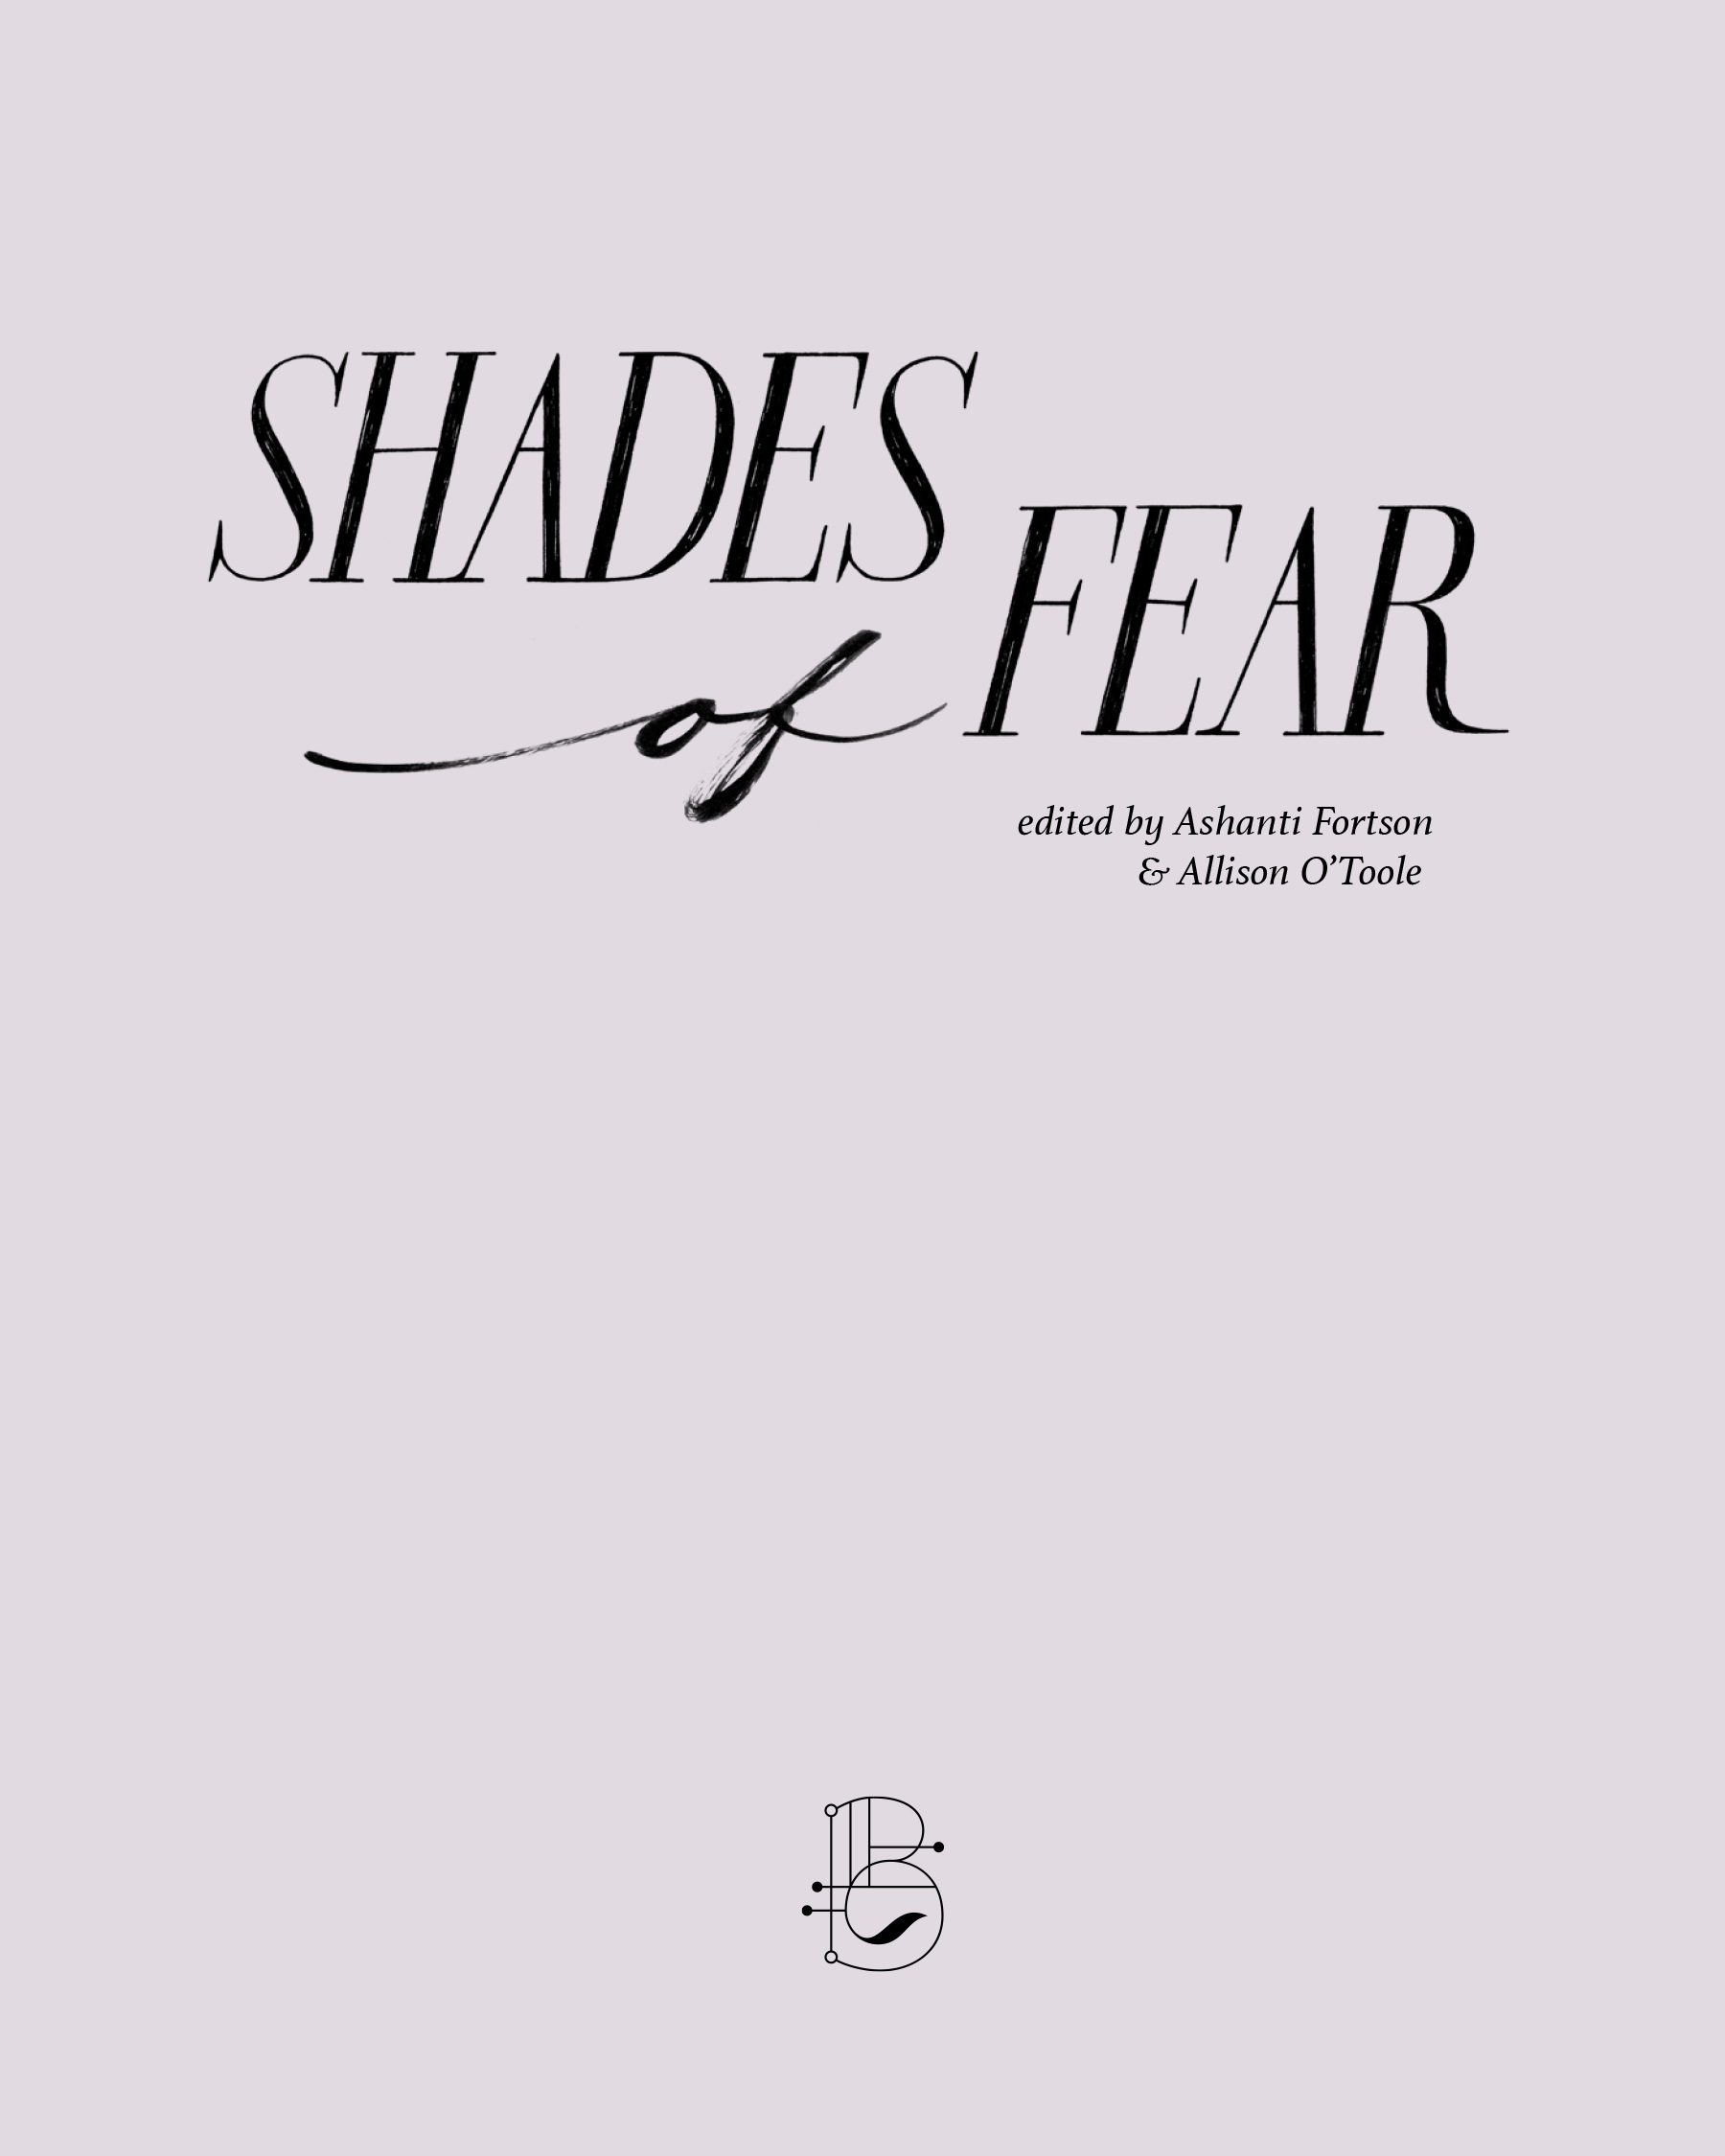 Read online Shades of Fear comic -  Issue # TPB - 2